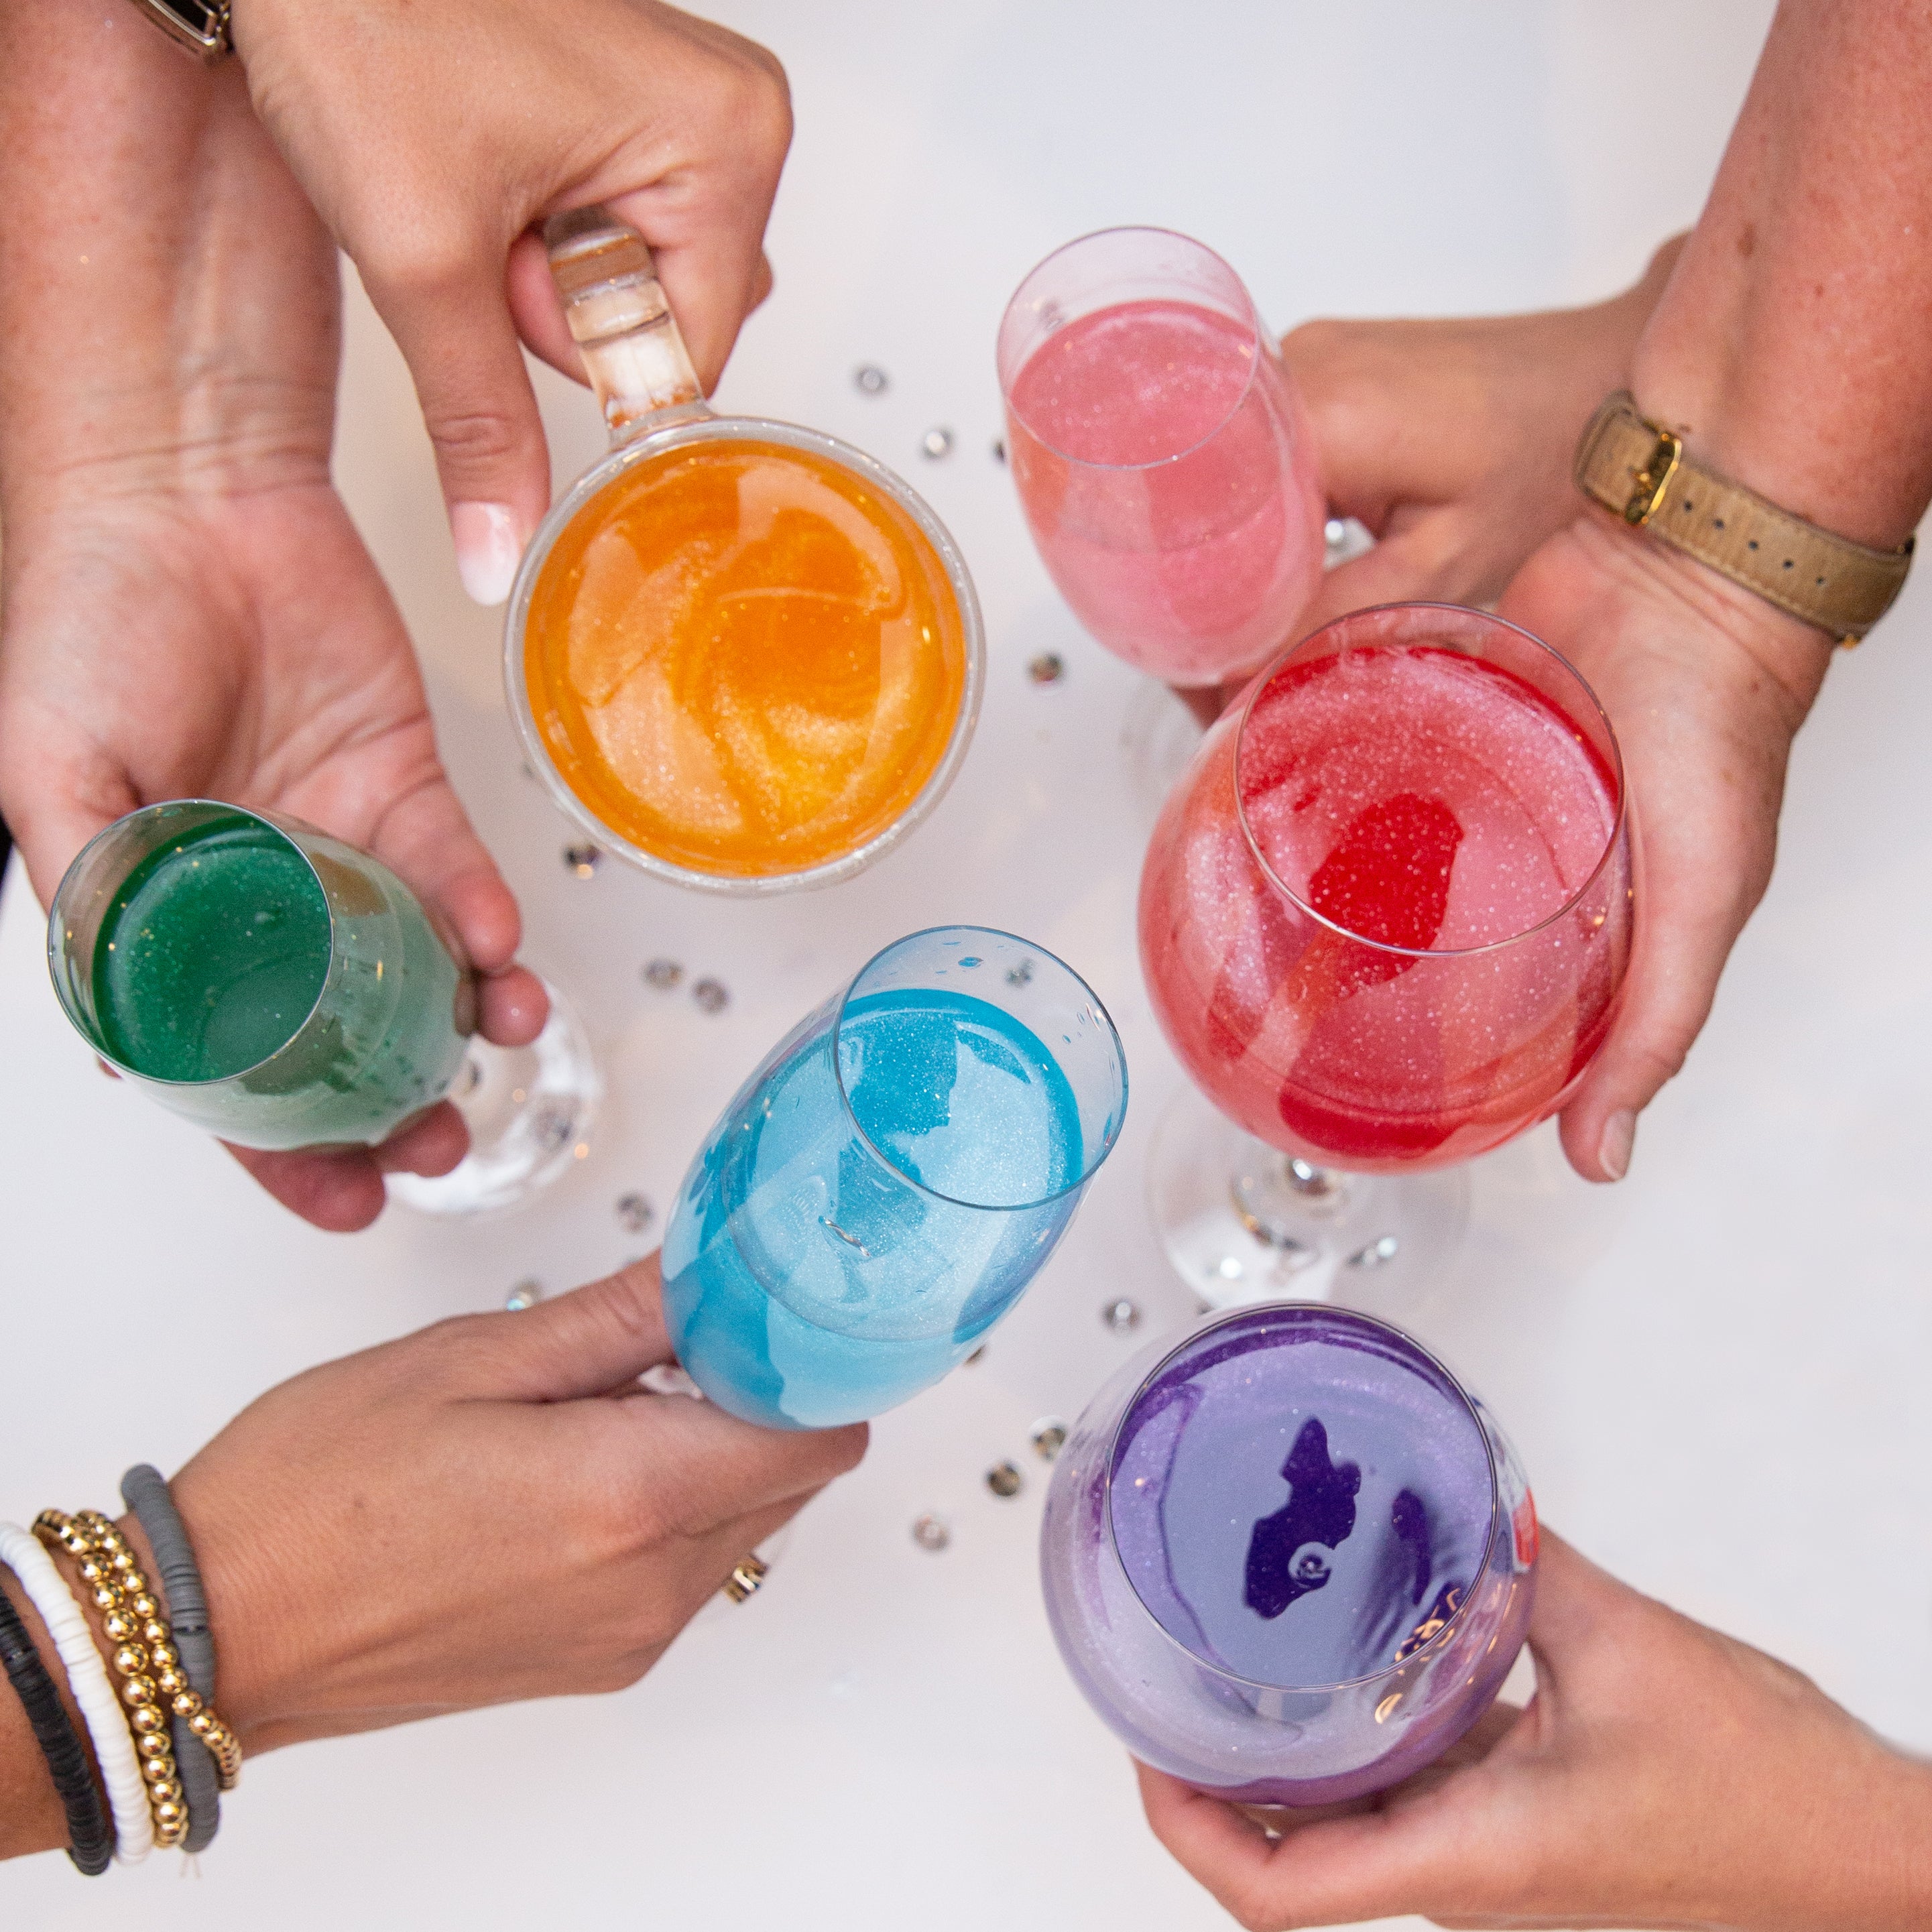 Six women clinking their glasses together to "cheers". Each glass has a different color of Sugar Mama Shimmer. Cha Cha Red, Violet Vibes, Blue La La, Mango Mama and Glow Up green in champagne and wine glasses.